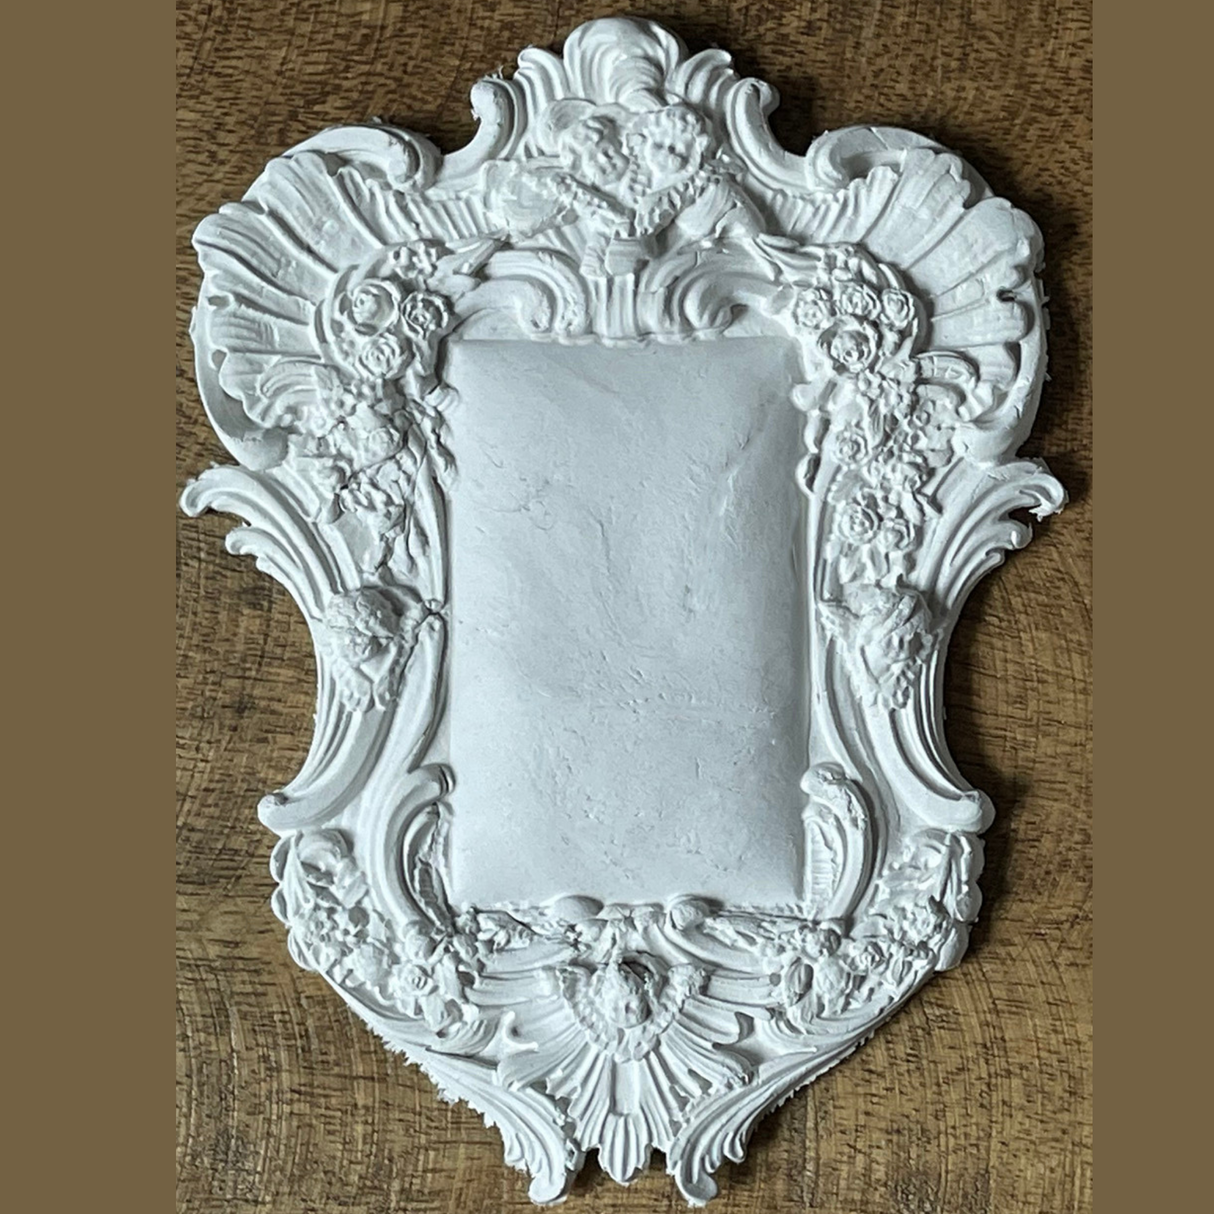 Frames 2 Decor Mould by IOD - Iron Orchid Designs @ Painted Heirloom